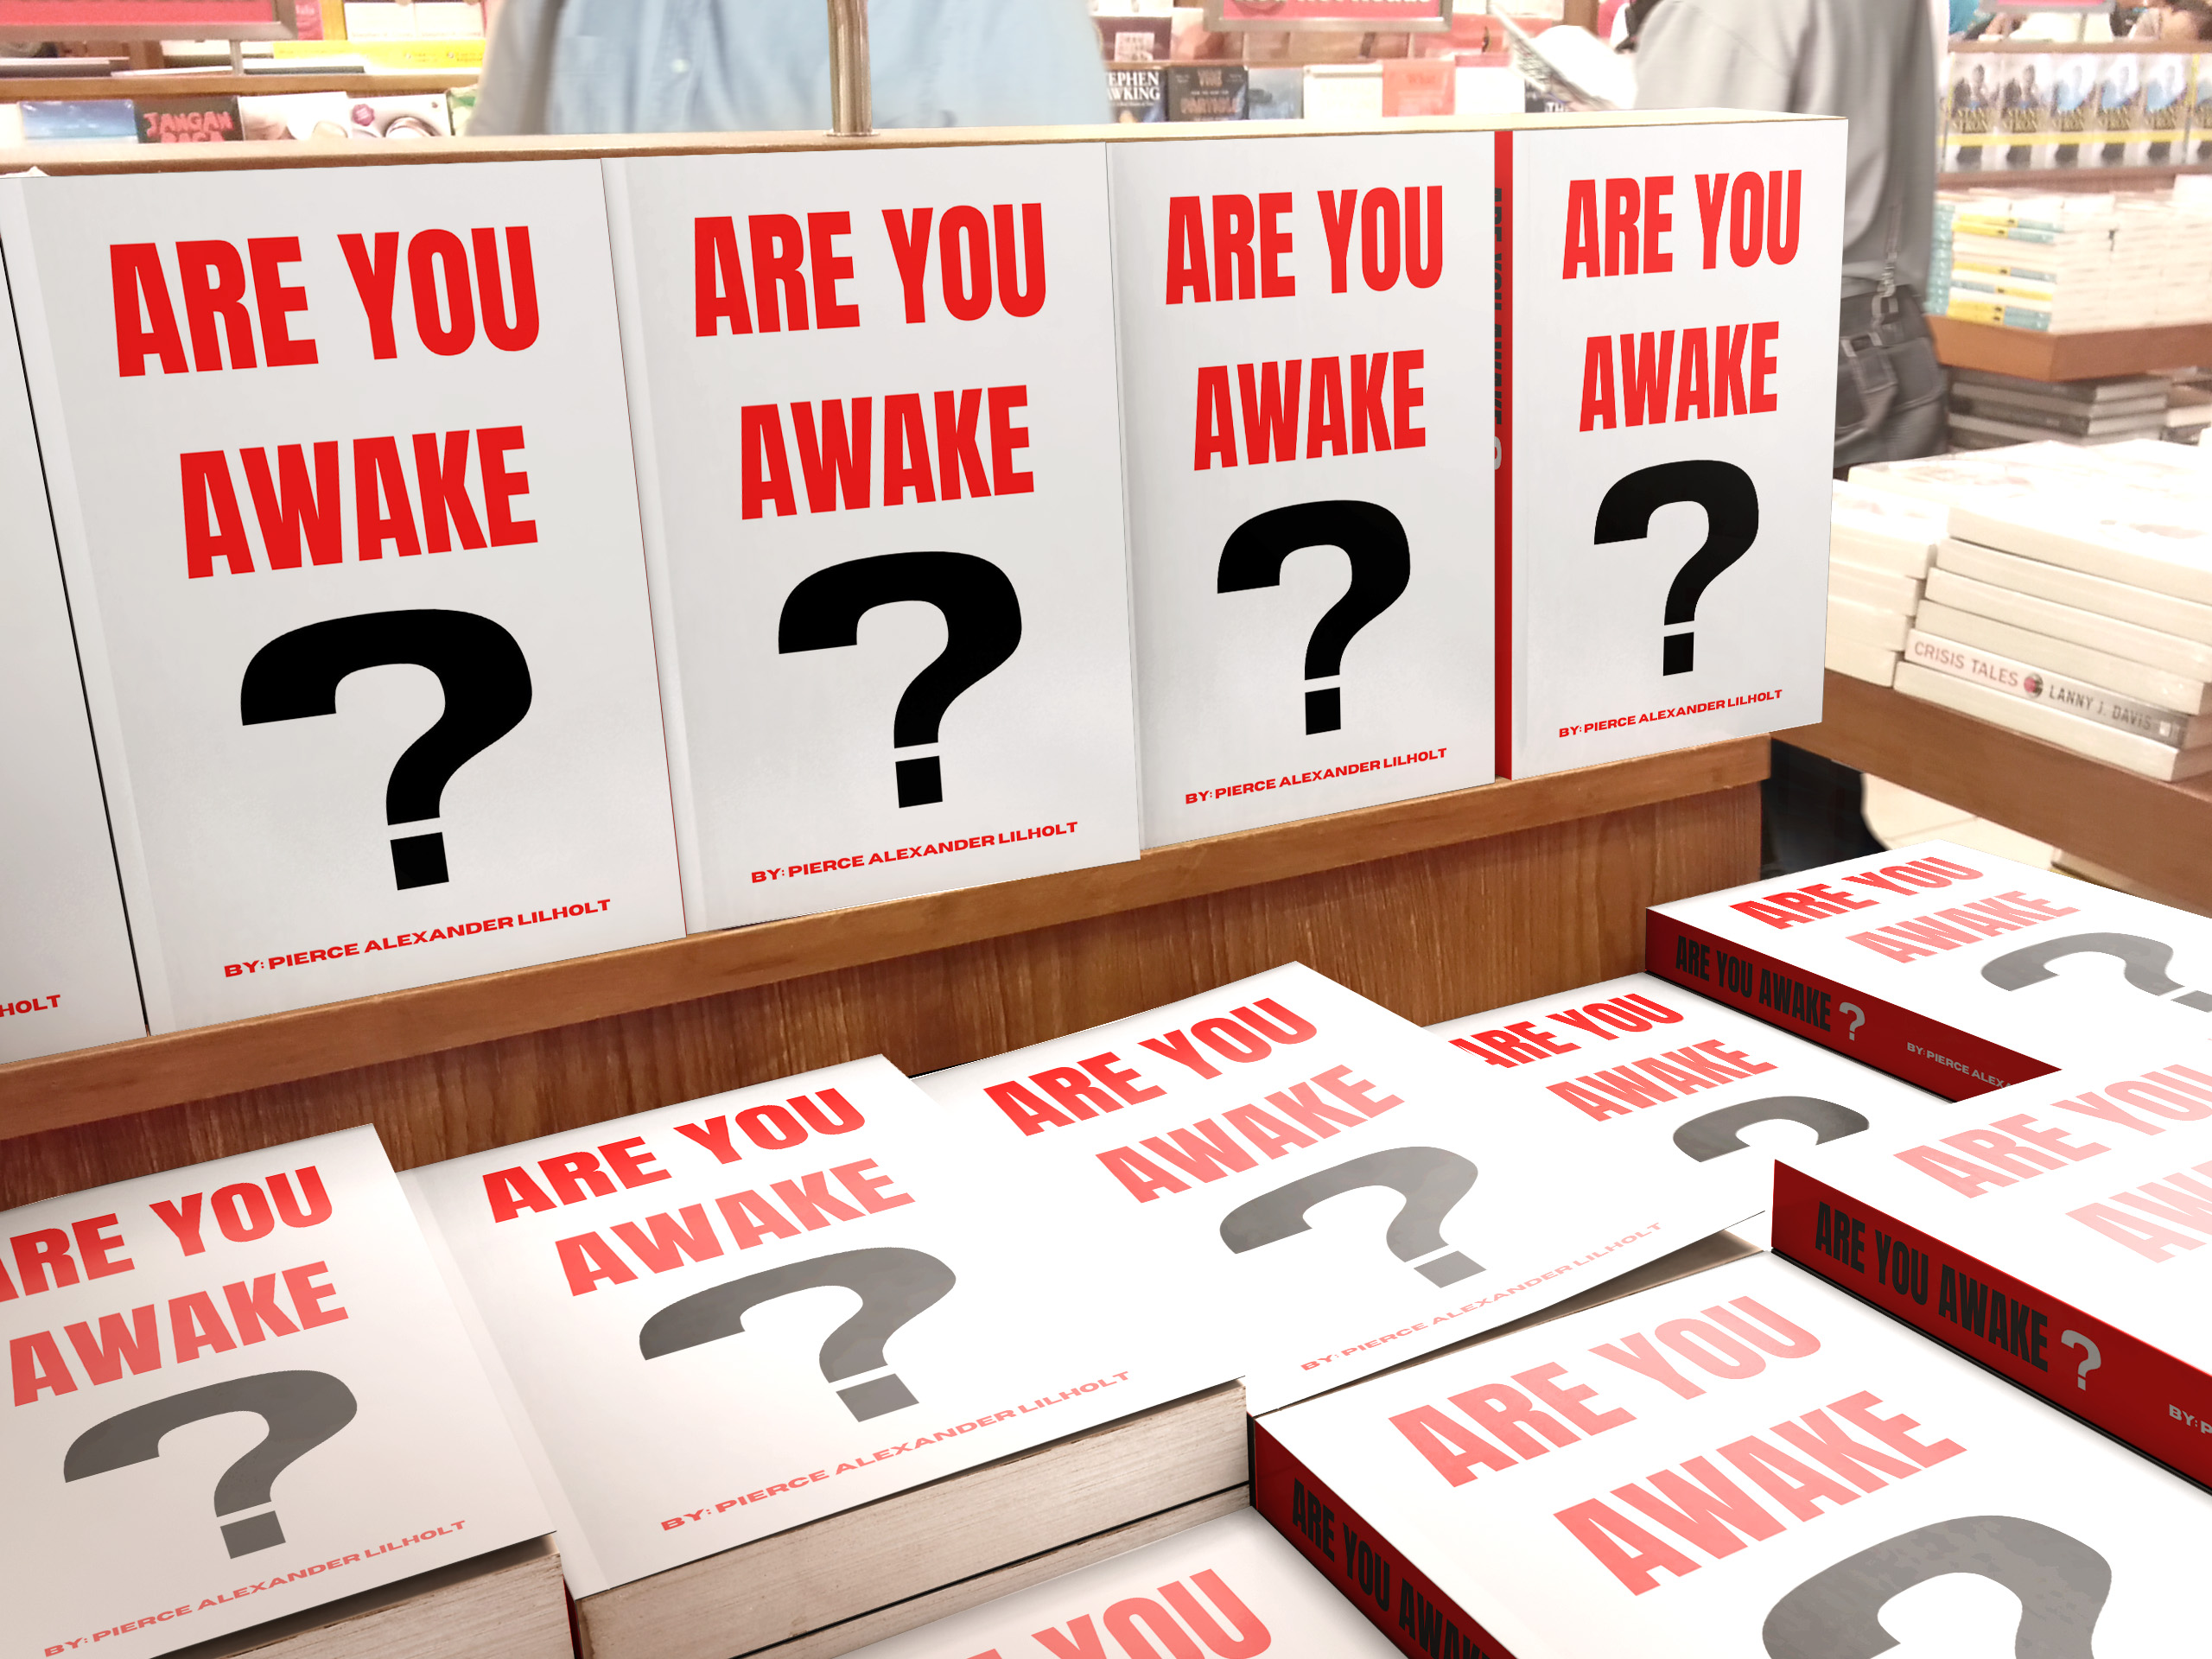 Non-fiction book "Are You Awake?" Questions Everything